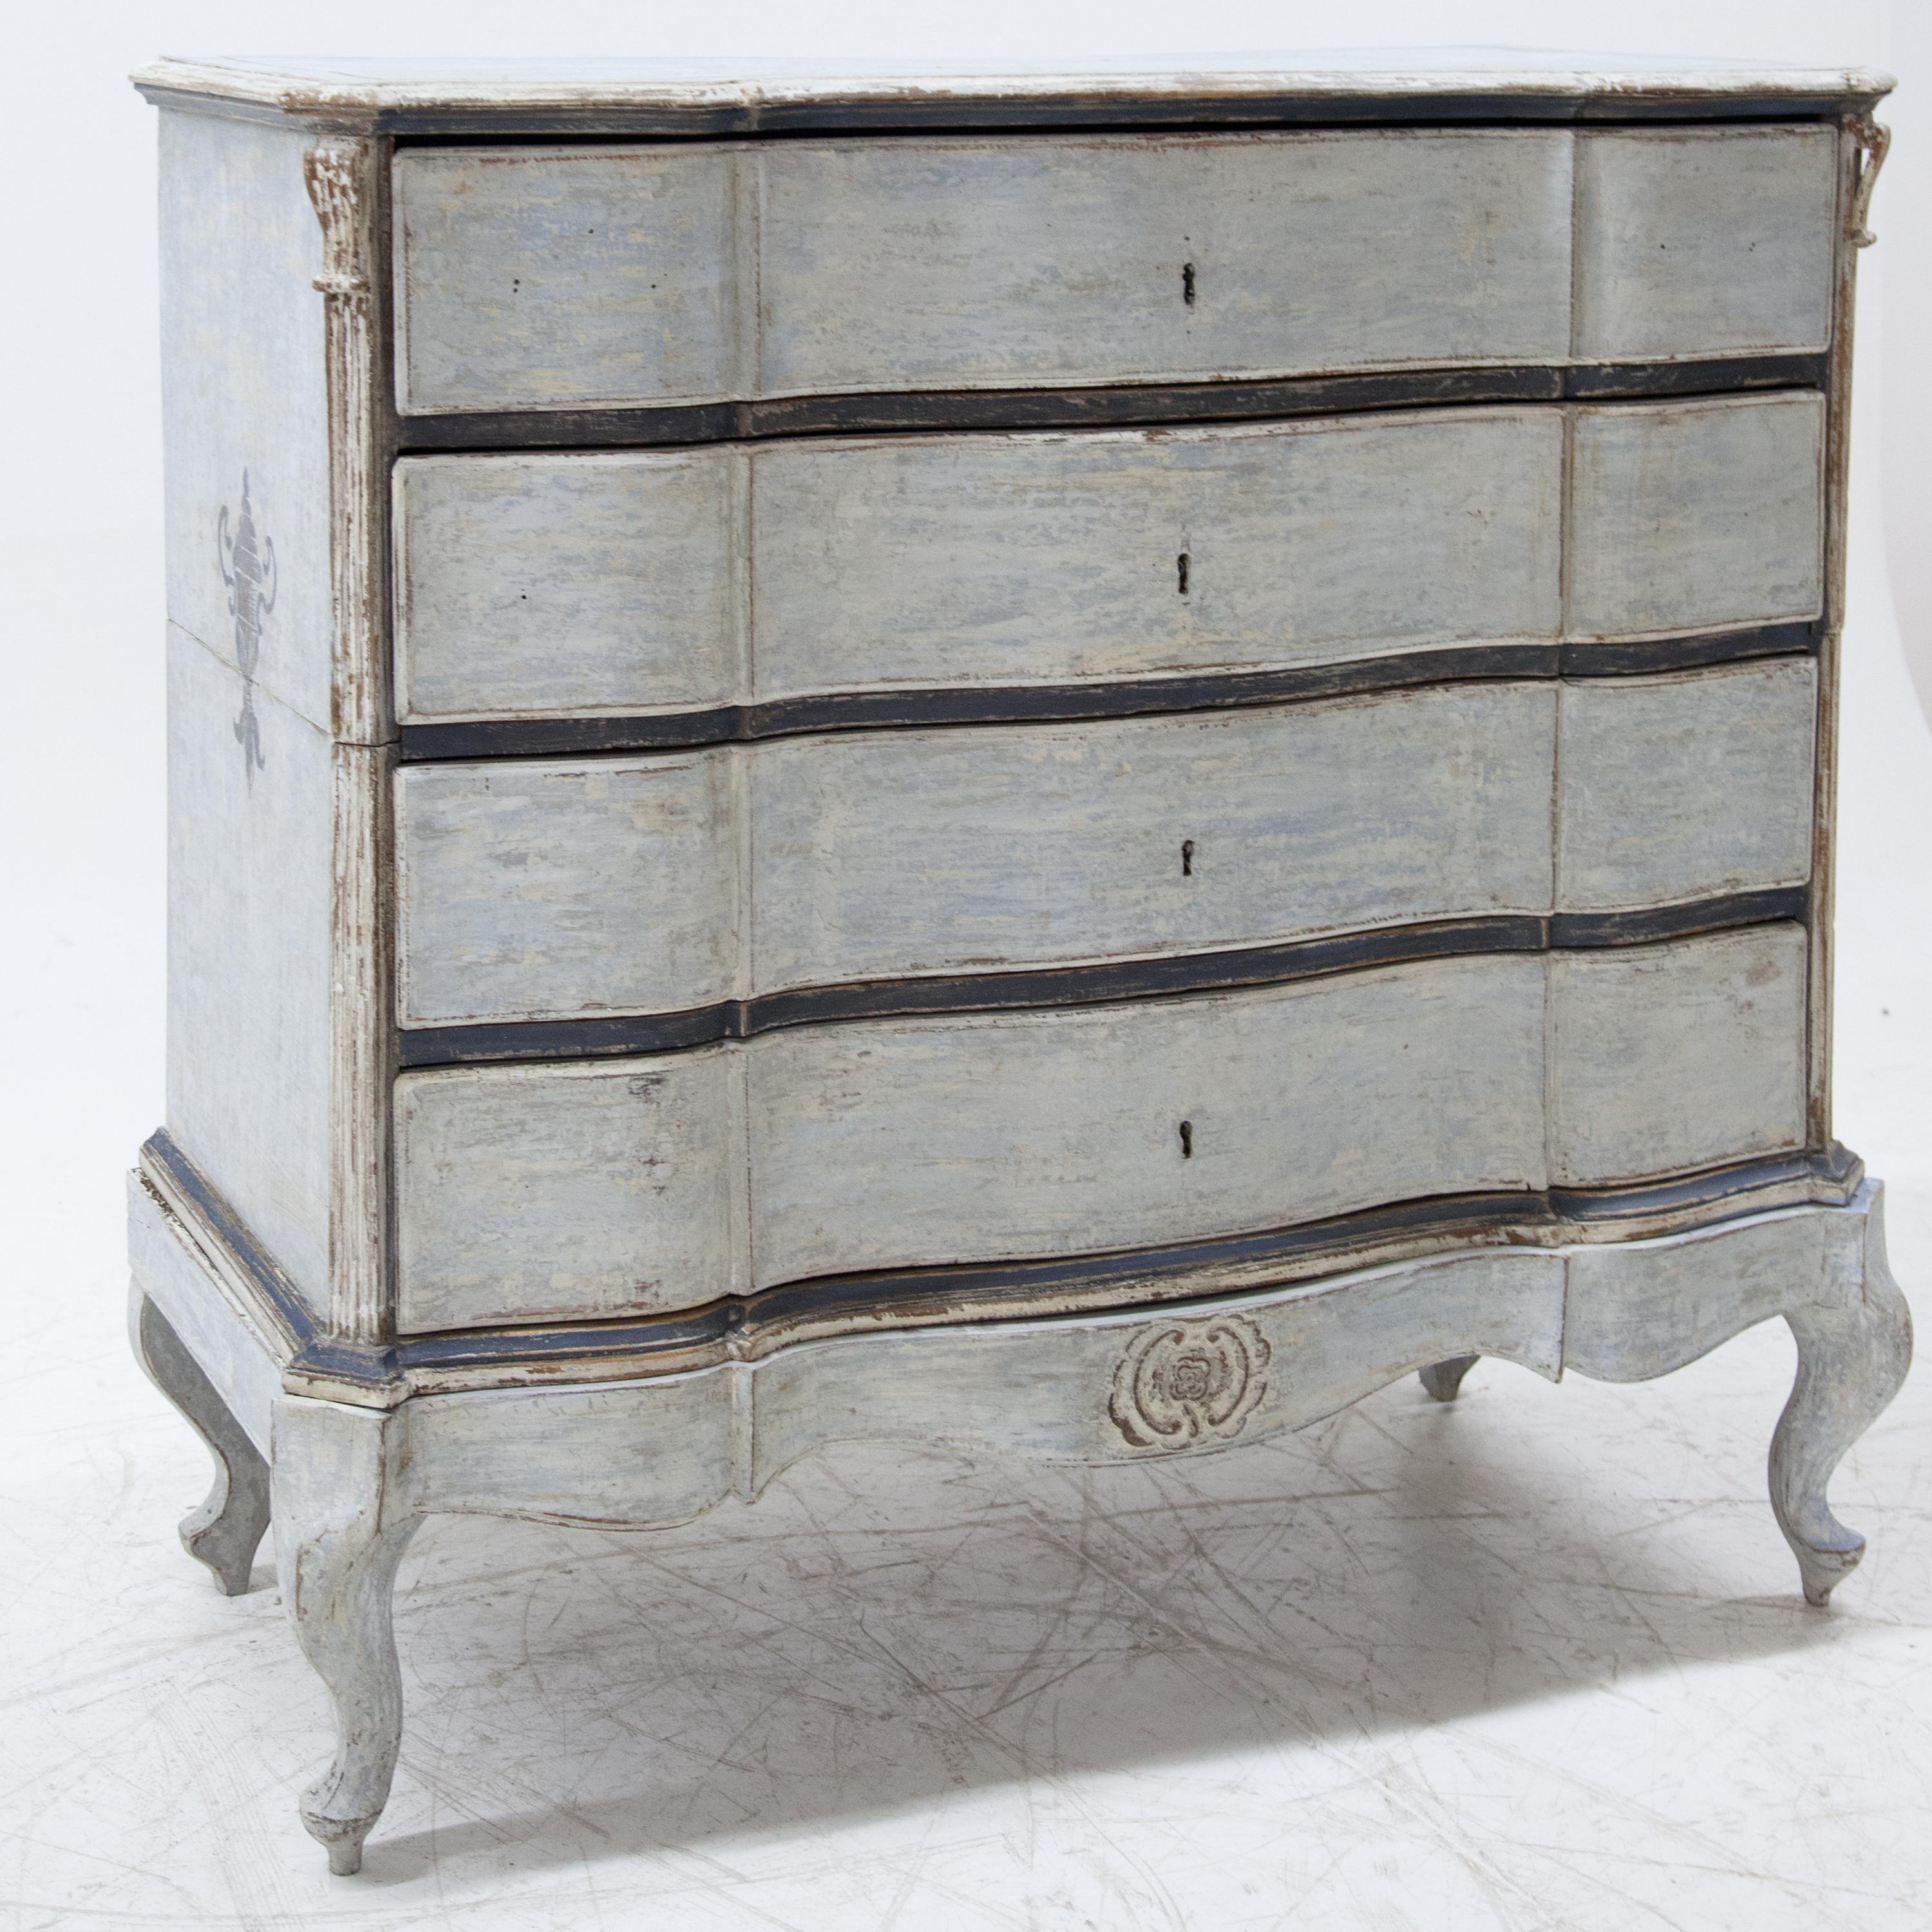 Baroque chest of drawers with four drawers and curved front standing on S-shaped curved legs and frame. The bevelled corners are fluted and end in a carved volute. The blue paint is new and has been decoratively rubbed through.